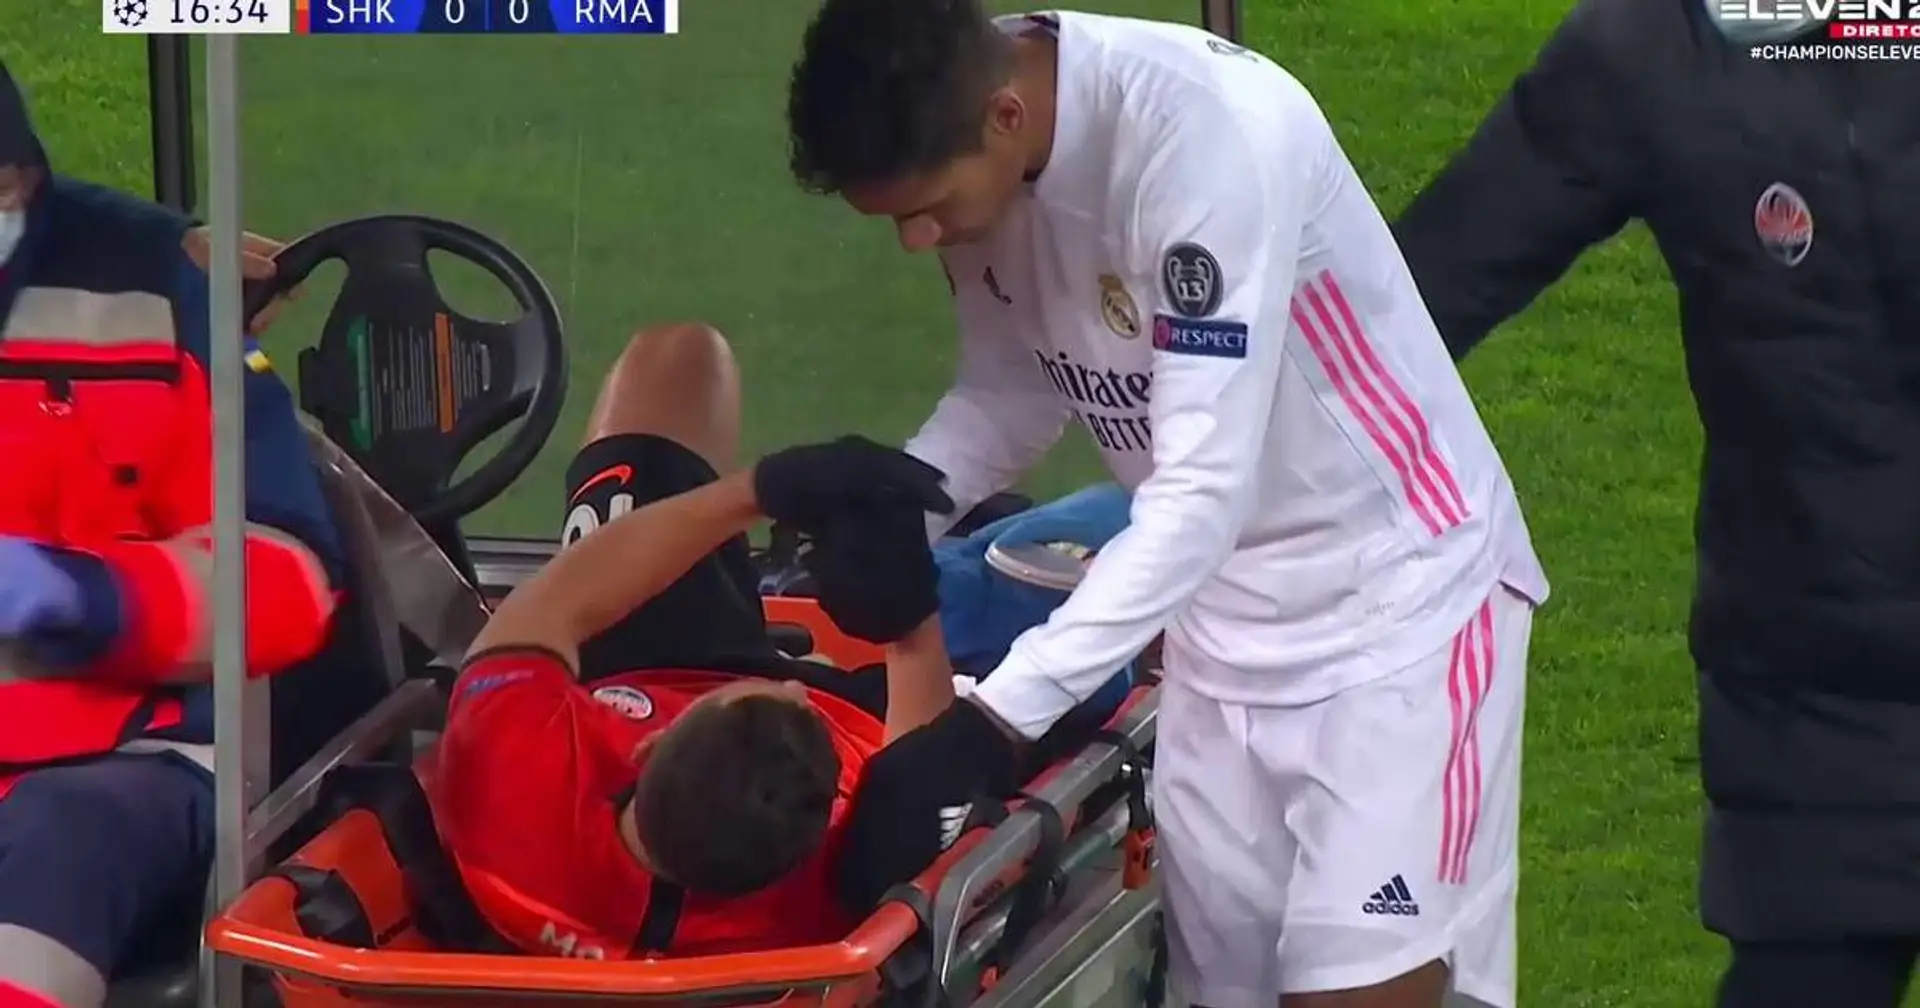 Raphael Varane shows true class, apologizing to Shakhtar player after nasty foul